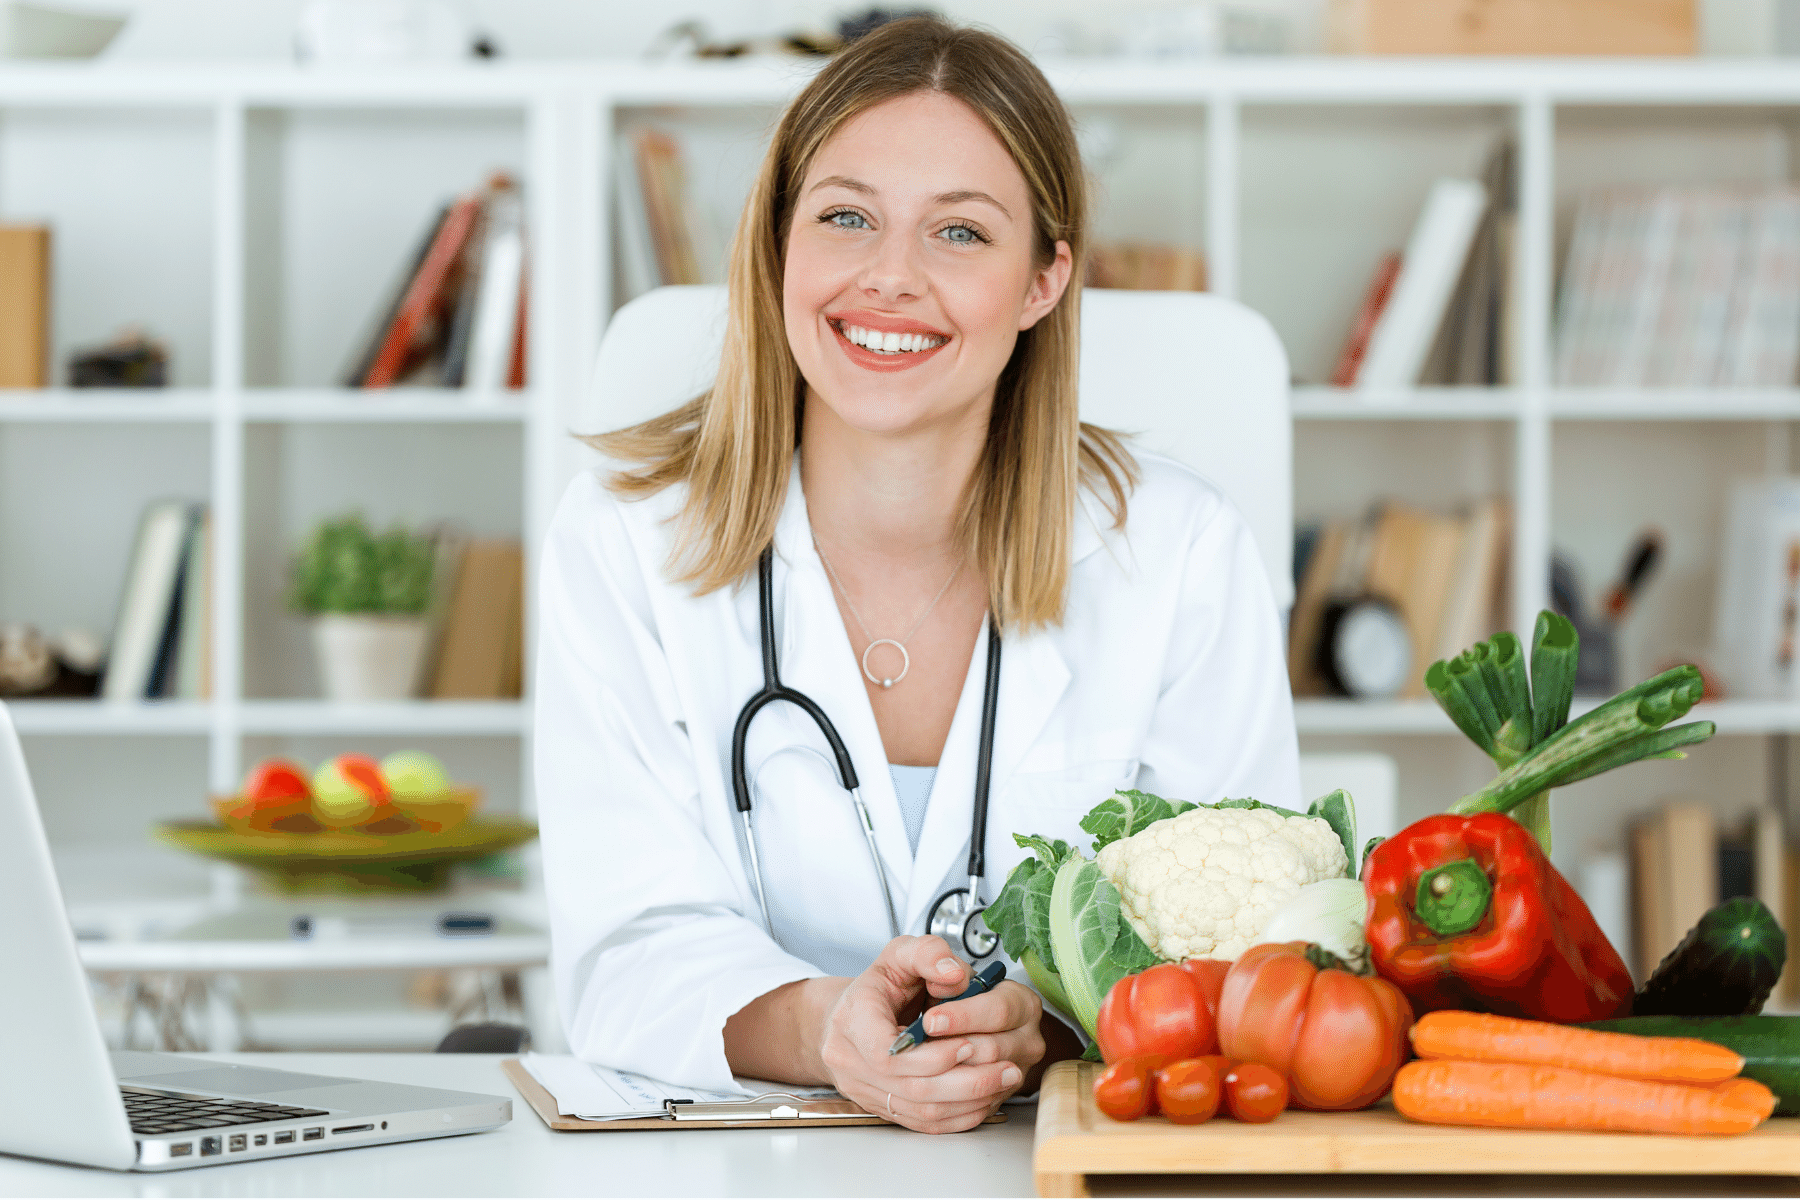 photo of a person in a lab coat with stethoscope holding a tray of fruits and vegetables